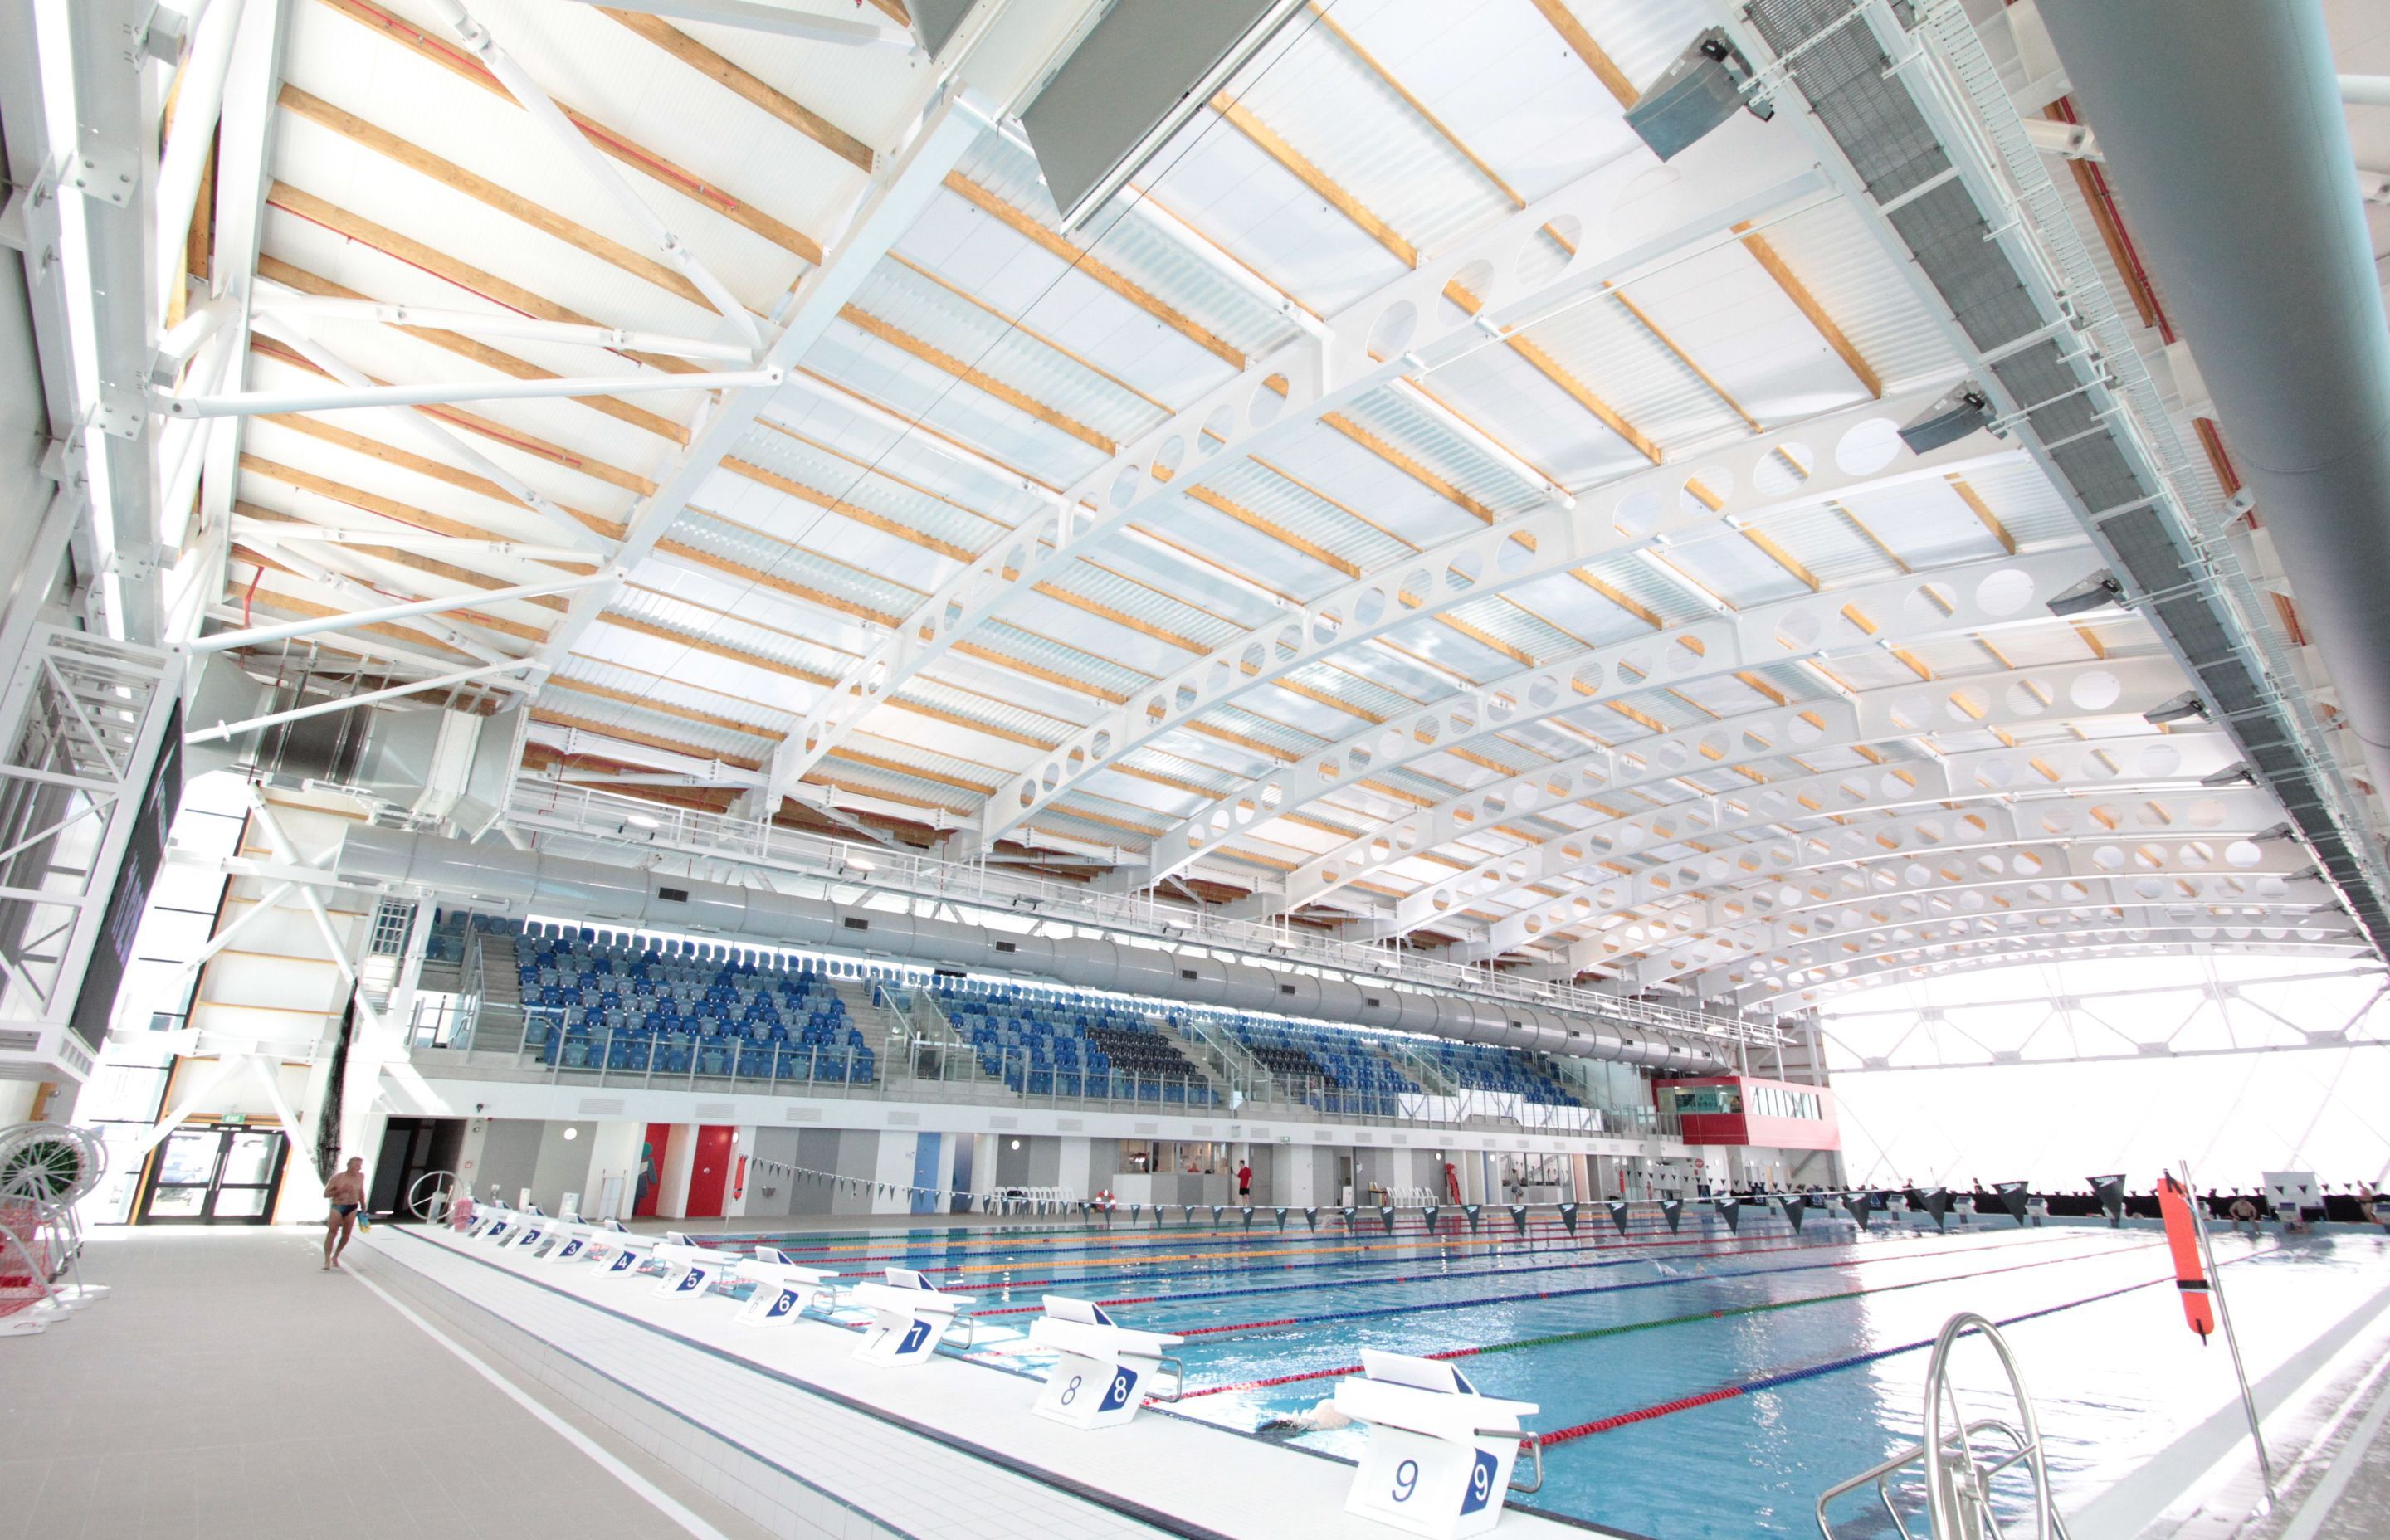 State of the Art Aquatic Centre